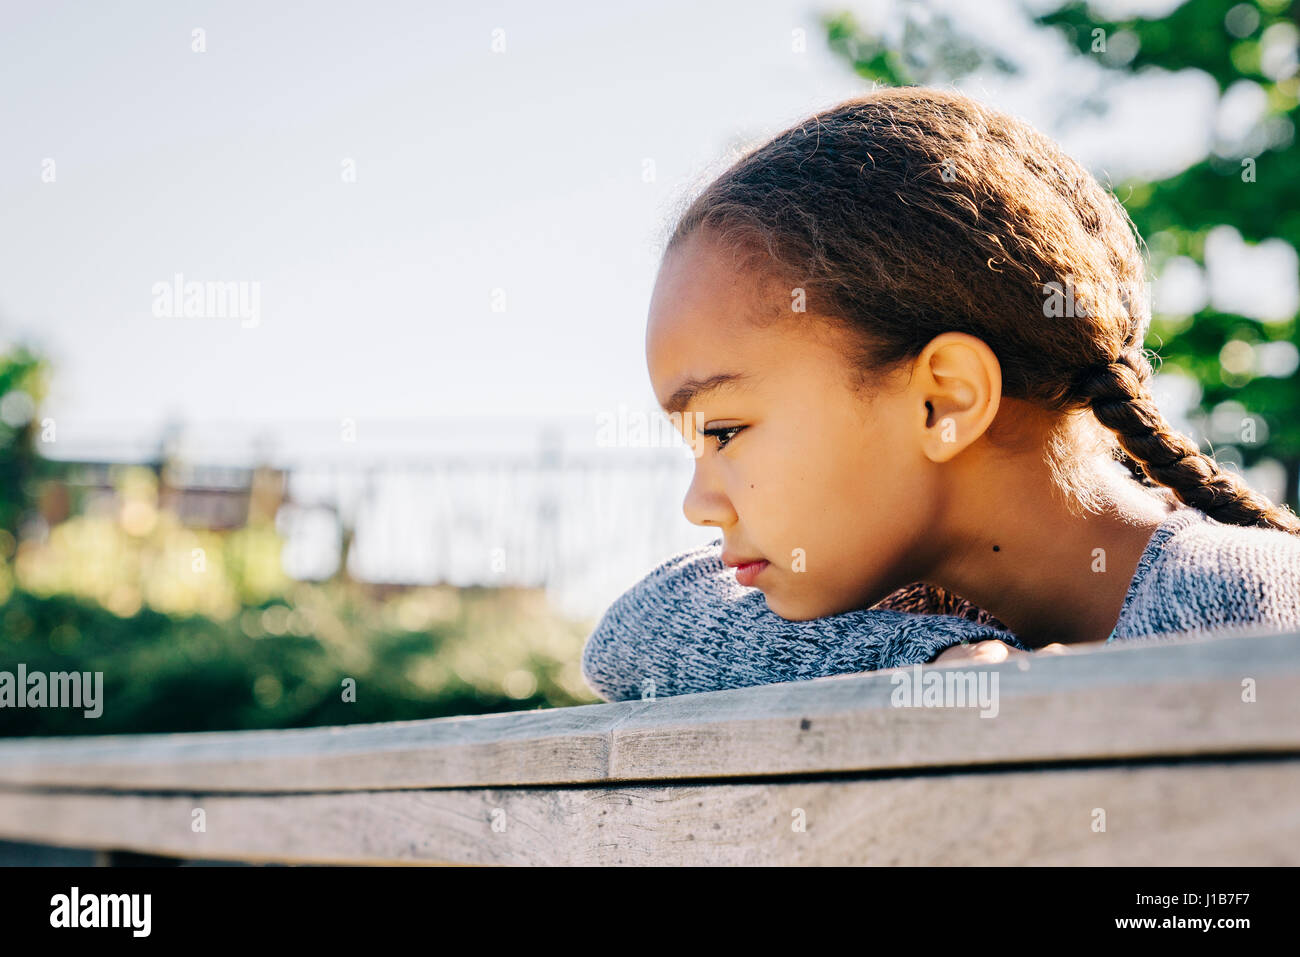 Pensive Mixed Race girl leaning on wooden railing Stock Photo